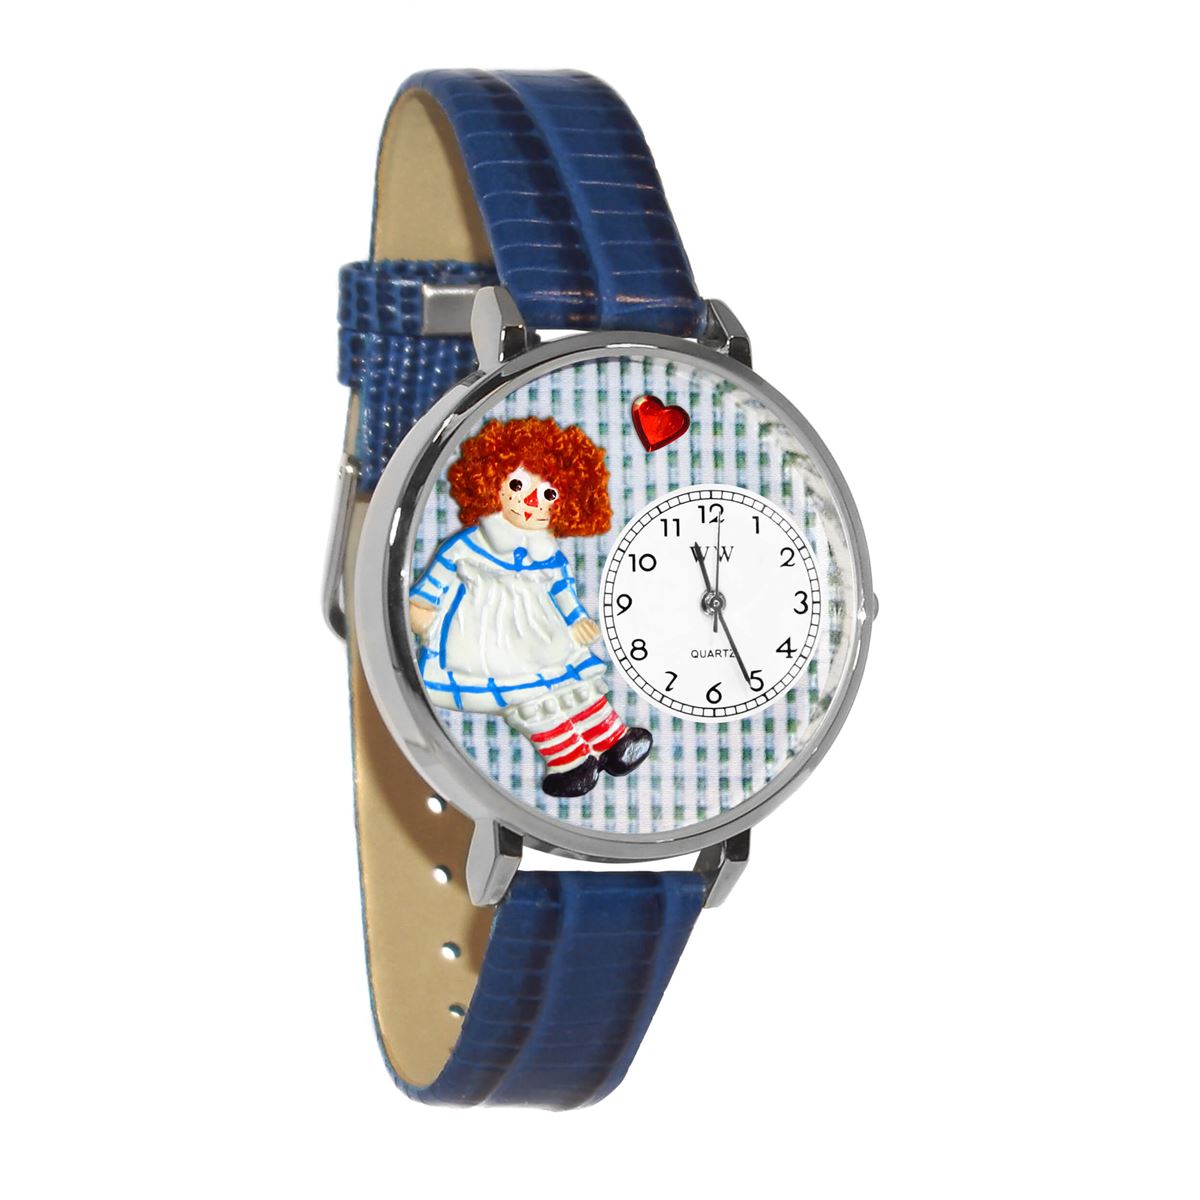 Whimsical Gifts | Vintage Raggedy Ann 3D Watch Large Style | Handmade in USA | Youth Themed |  | Novelty Unique Fun Miniatures Gift | Silver Finish Royal Blue Leather Watch Band